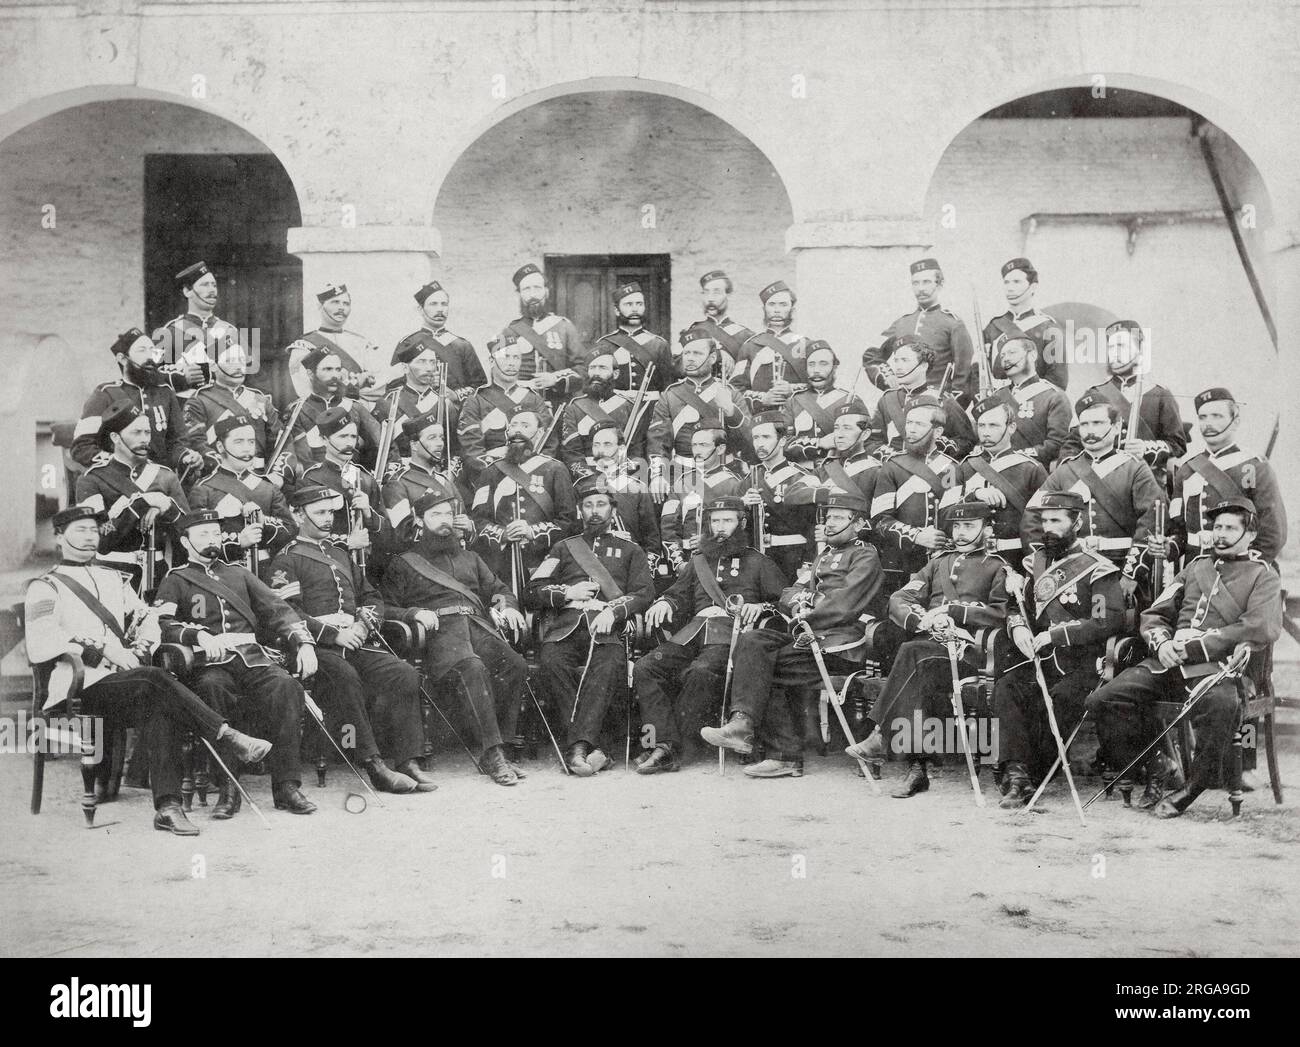 Vintage 19th century photograph - British army in India - NCOs of the 77th Regiment 1870 Stock Photo